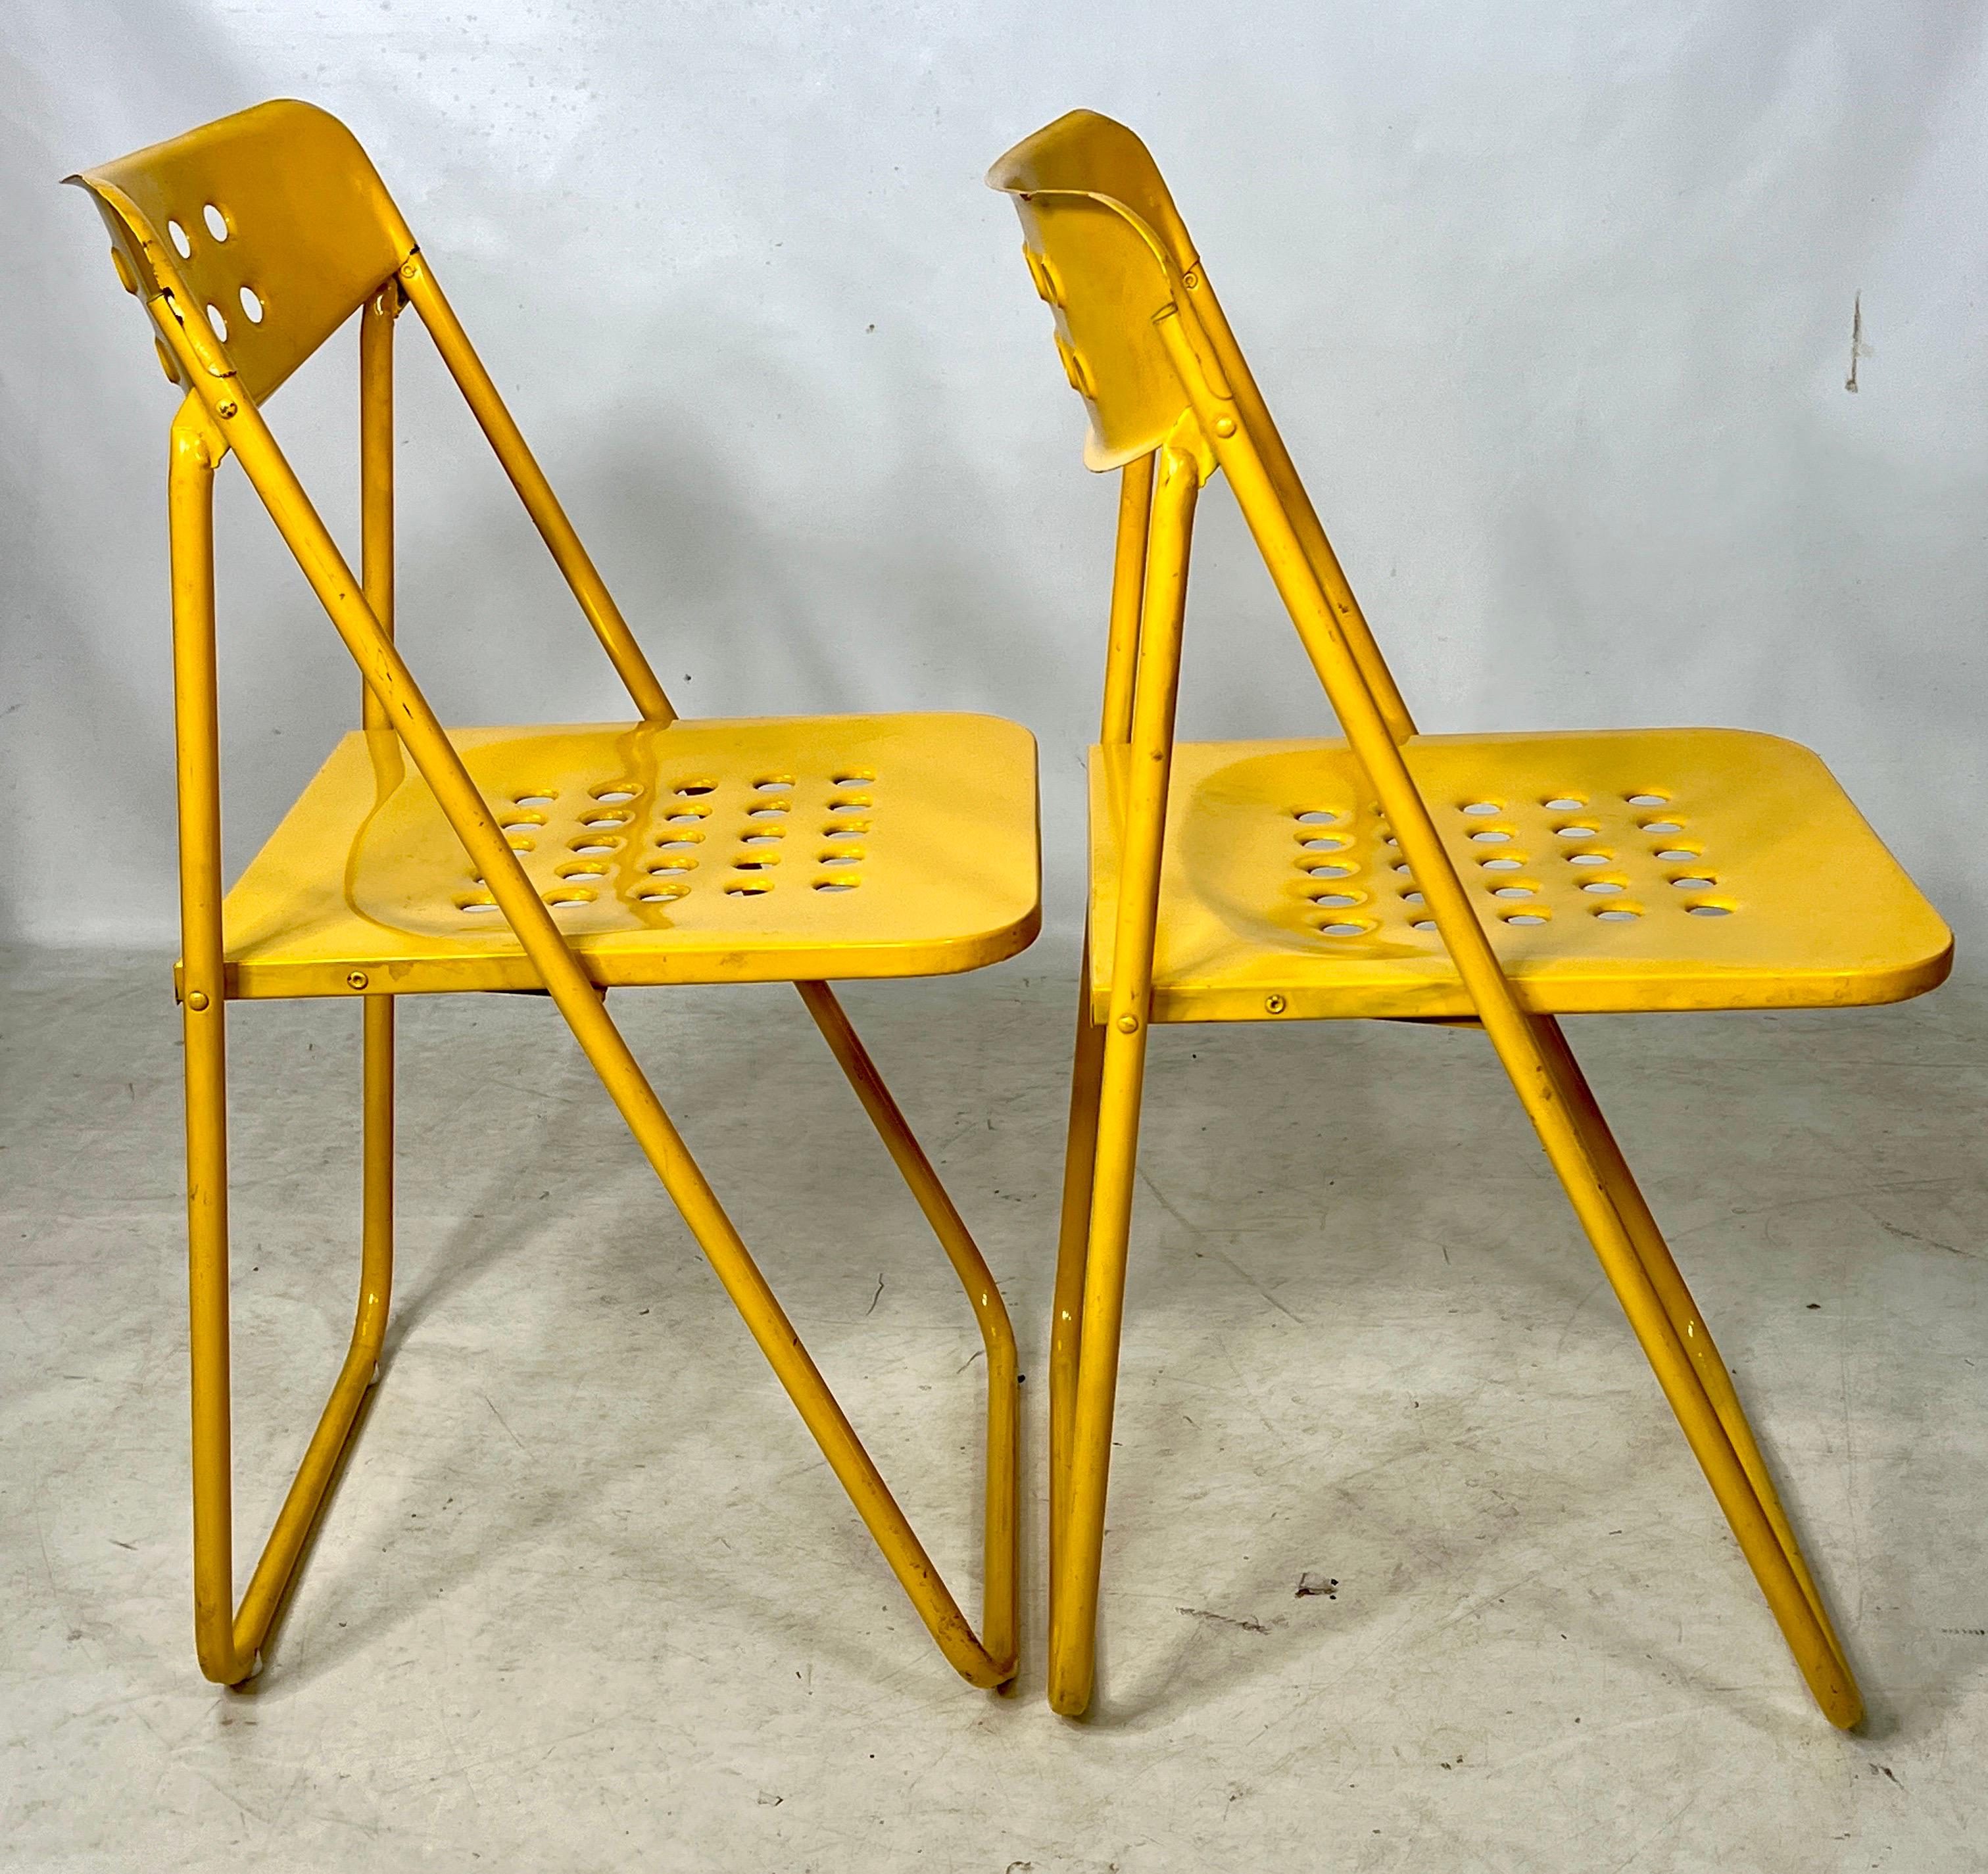 Vintage Yellow Industrial Modern Folding Chairs - a Pair For Sale 1